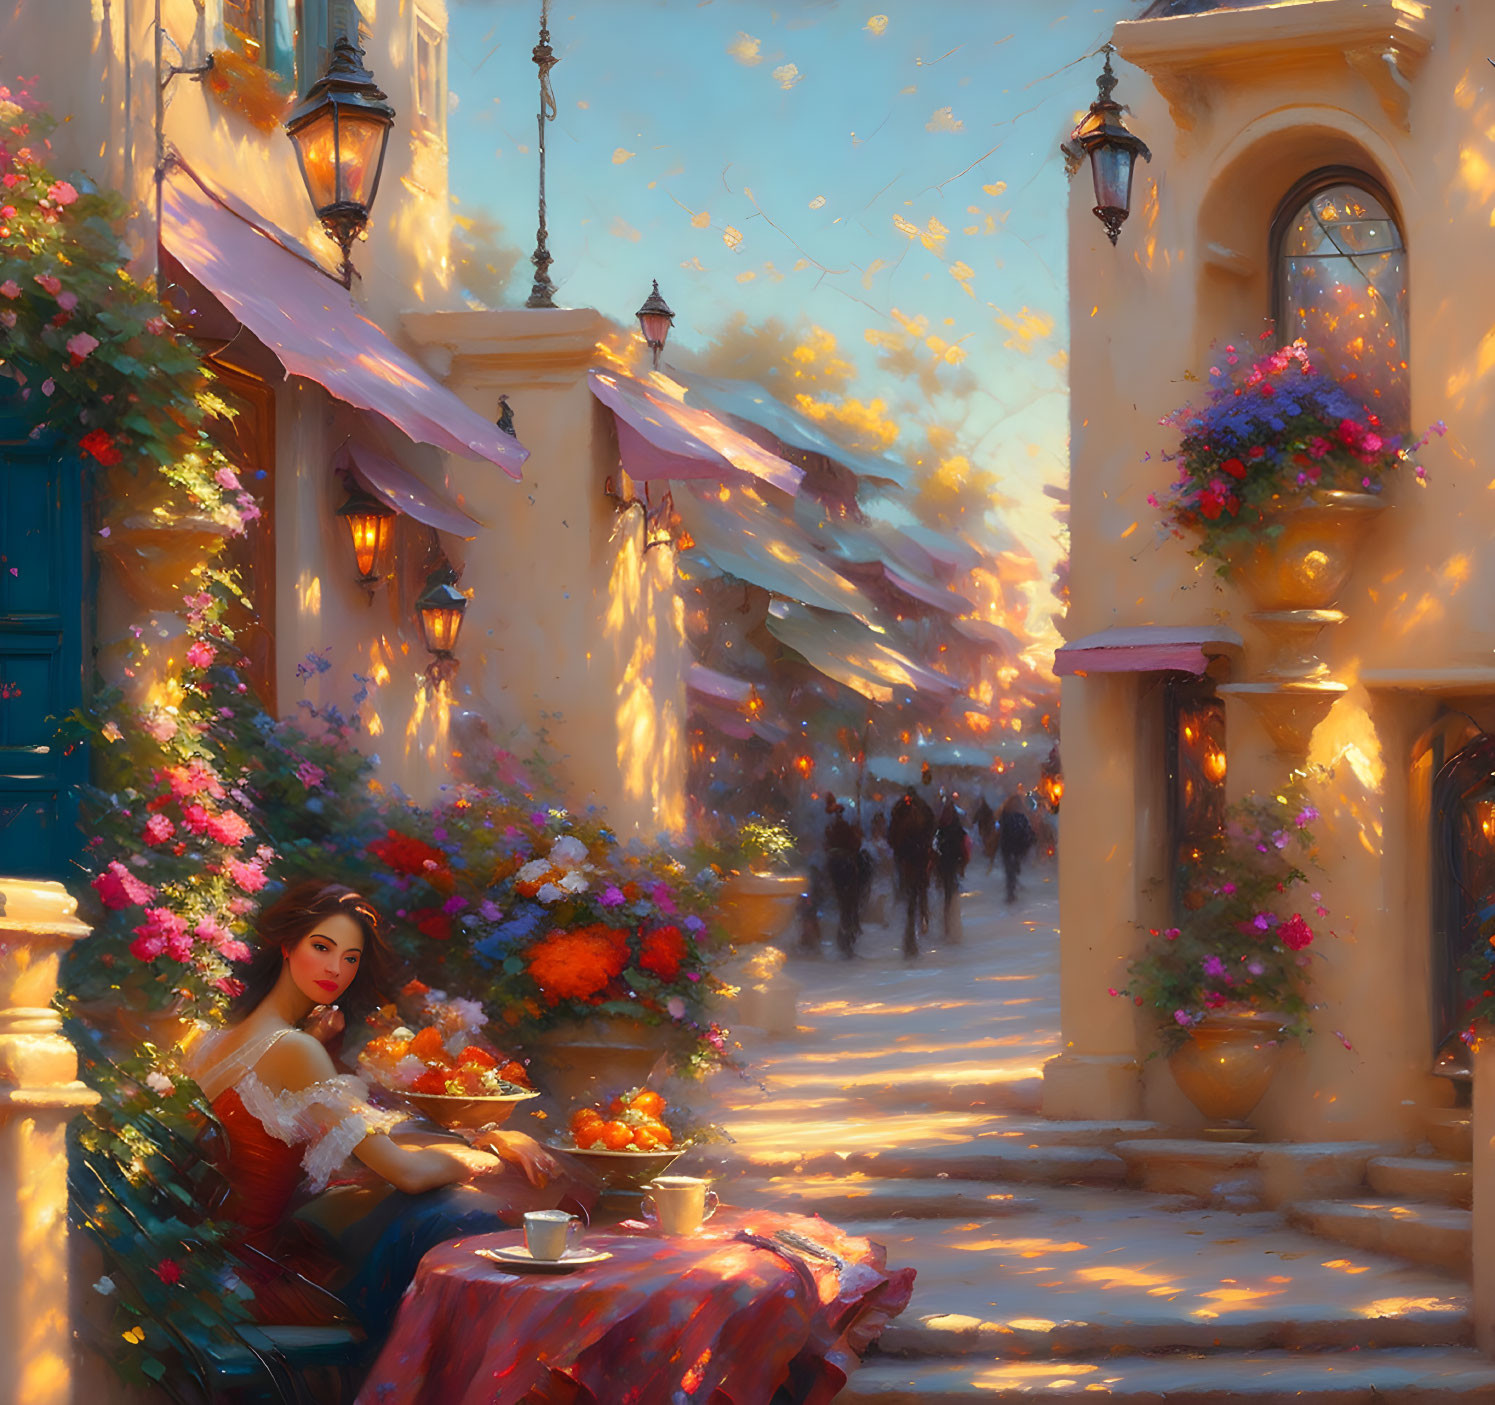 Woman at street cafe surrounded by vibrant flowers and people under warm golden-hour glow